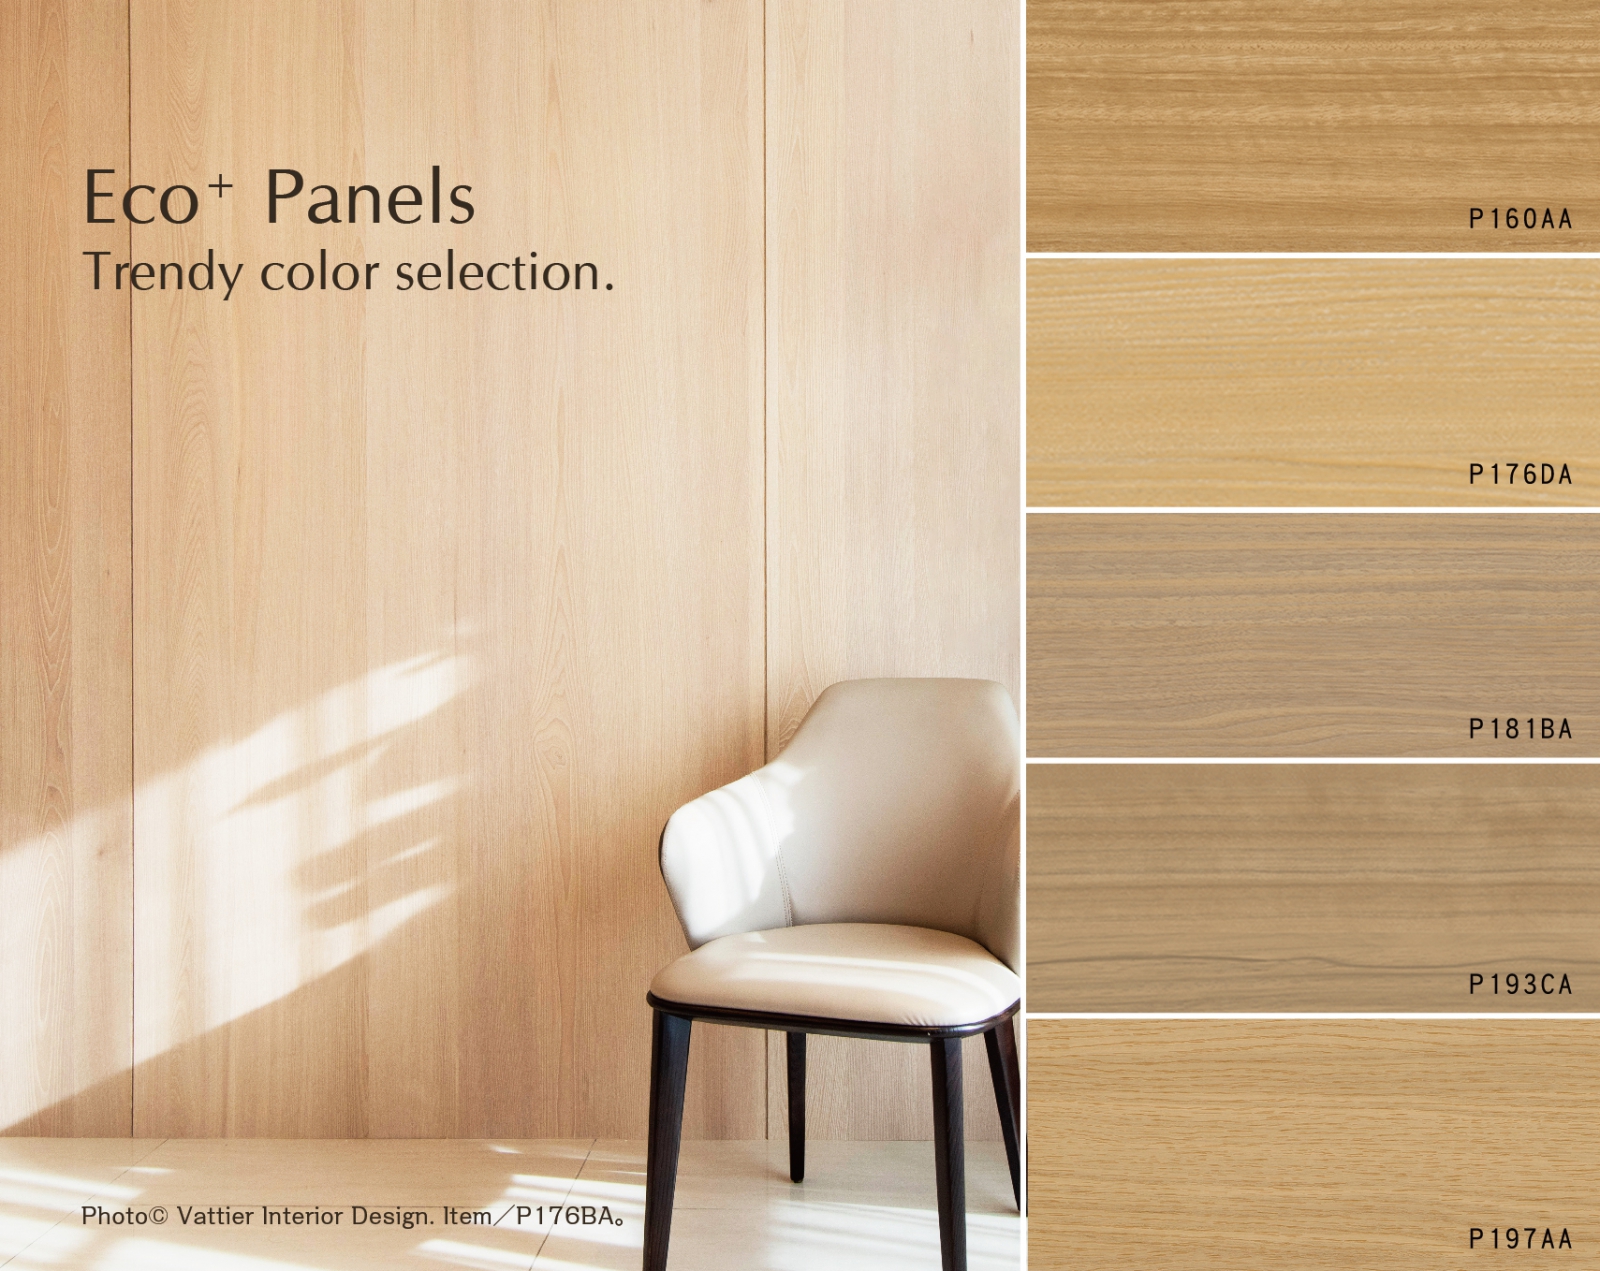 Eco+ Panels trendy color selection